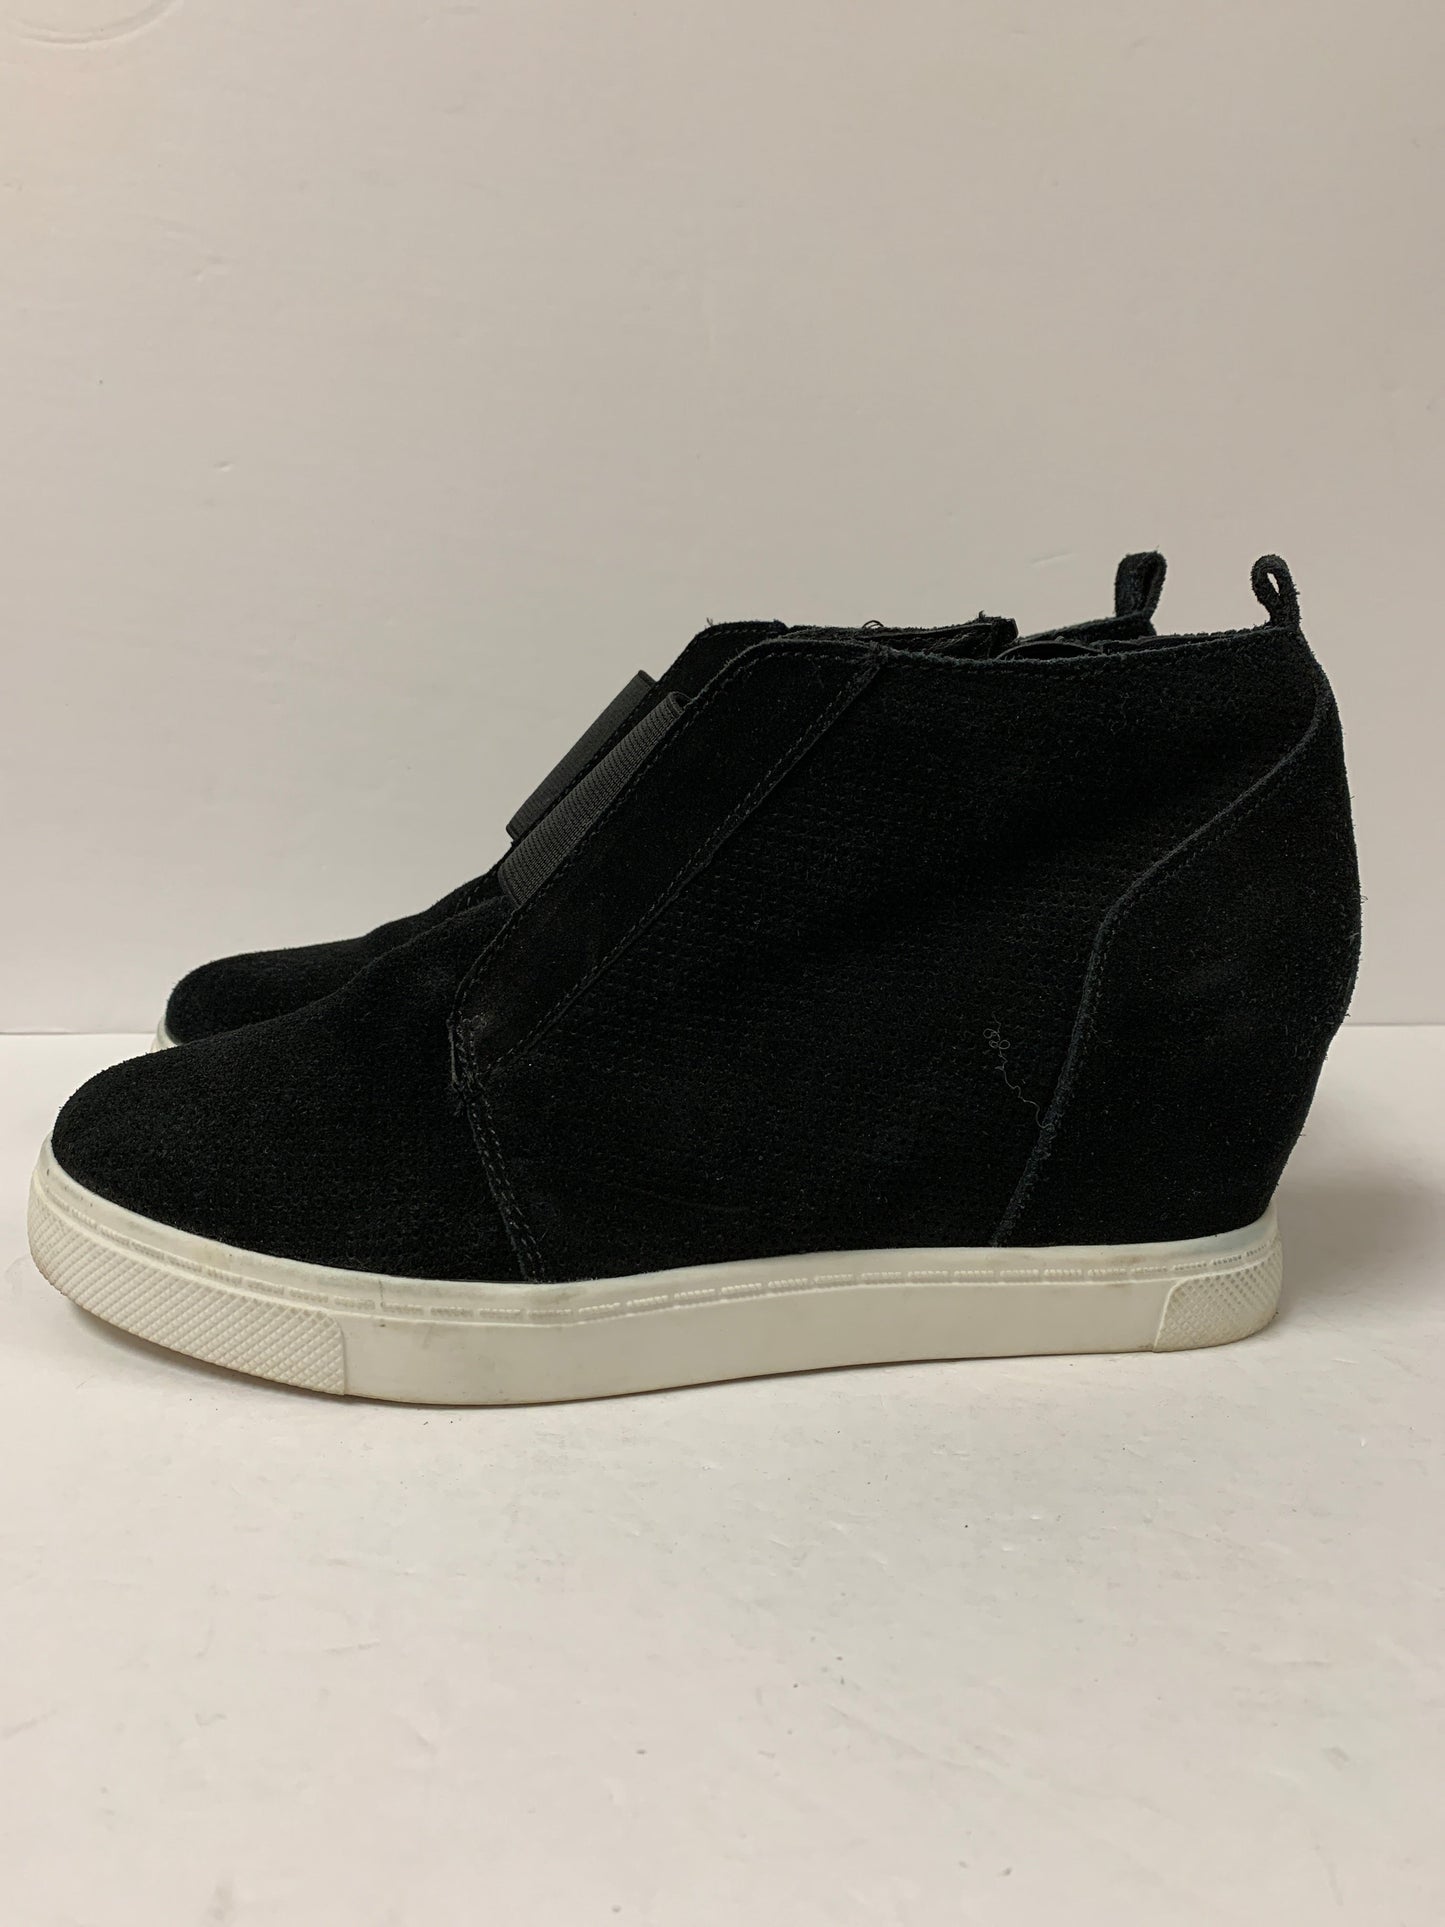 Shoes Heels Wedge By Steve Madden  Size: 11